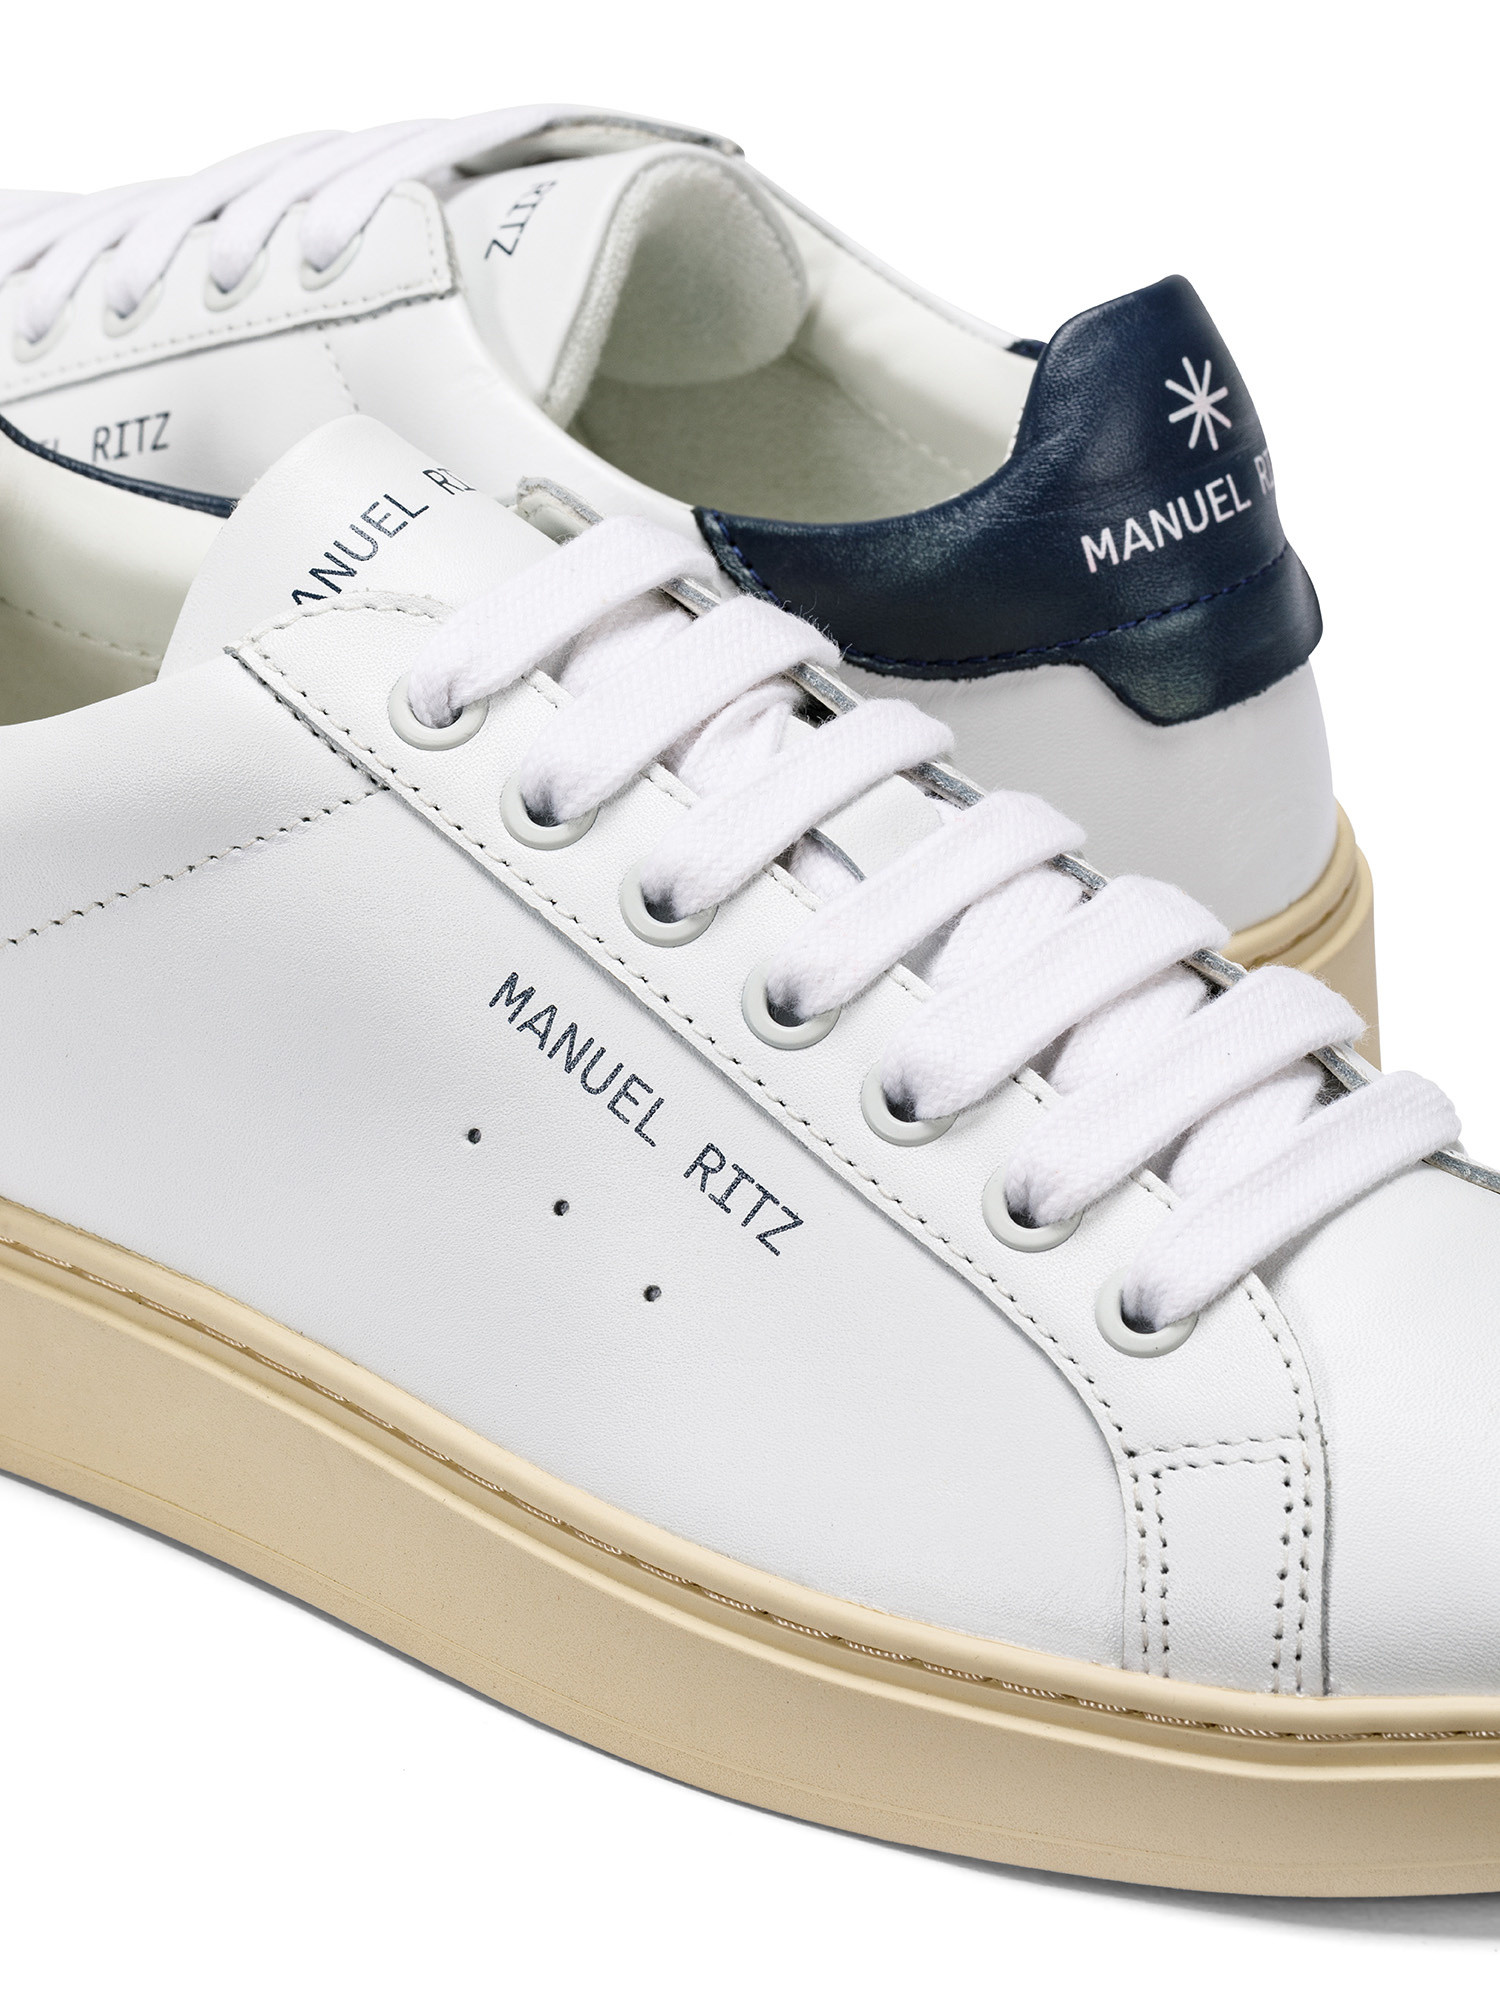 Manuel Ritz - Leather sneakers, White, large image number 2